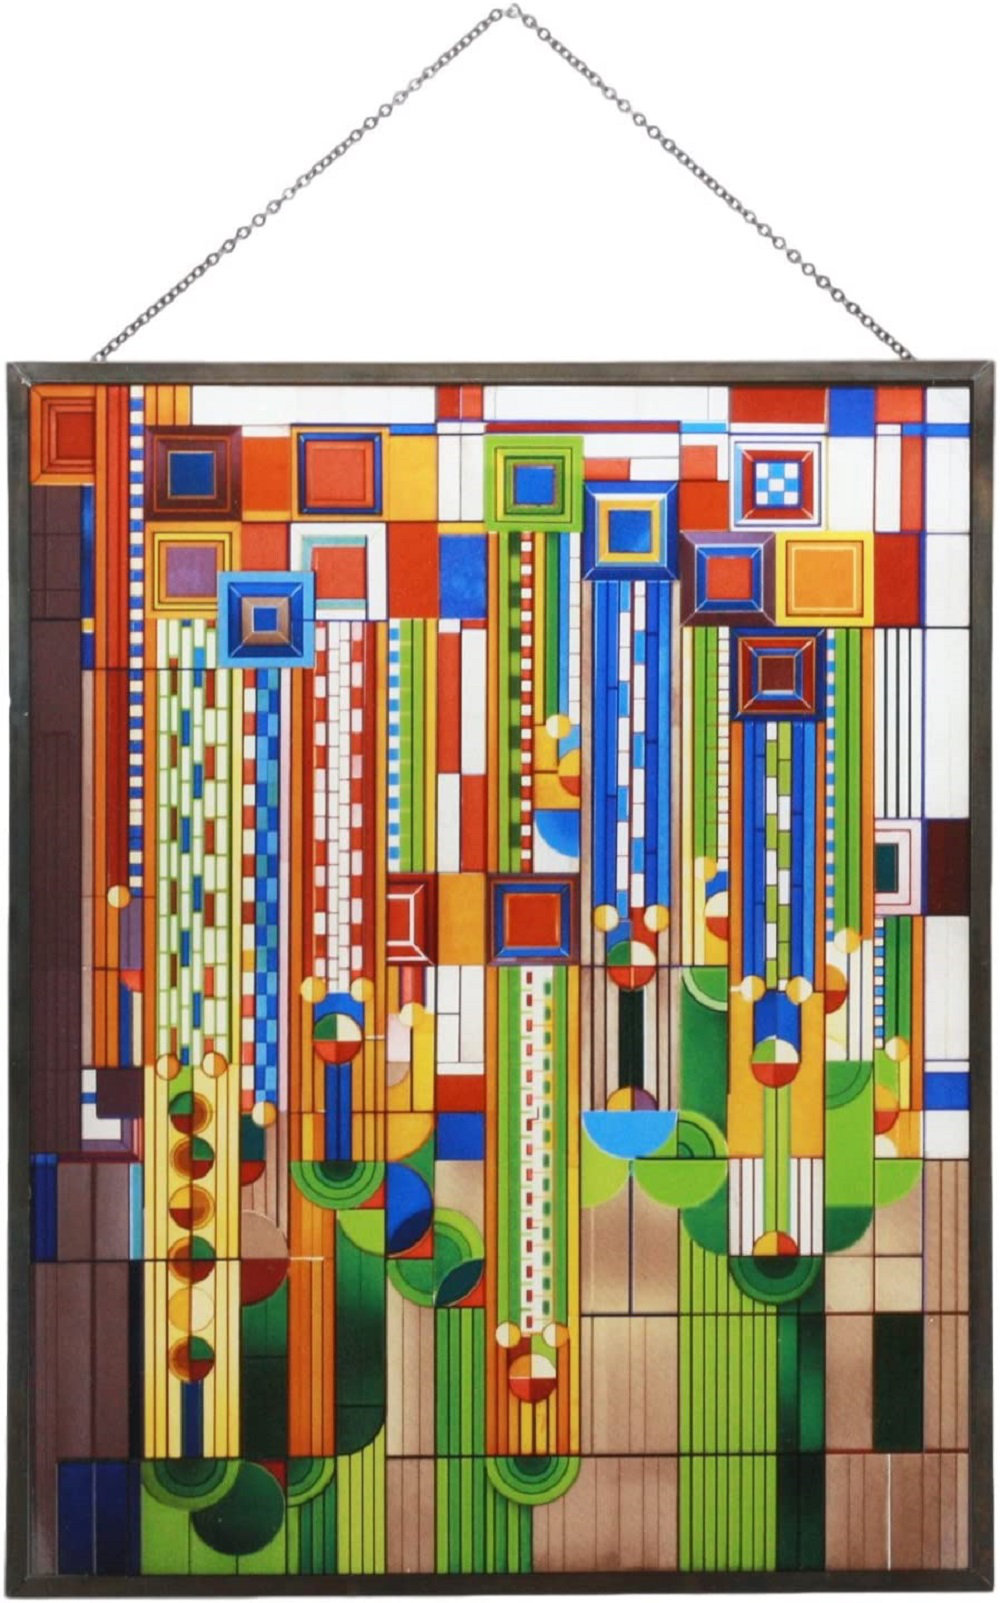 Frank Lloyd Wright Paint by Number Kit - Saguaro Cactus and Forms